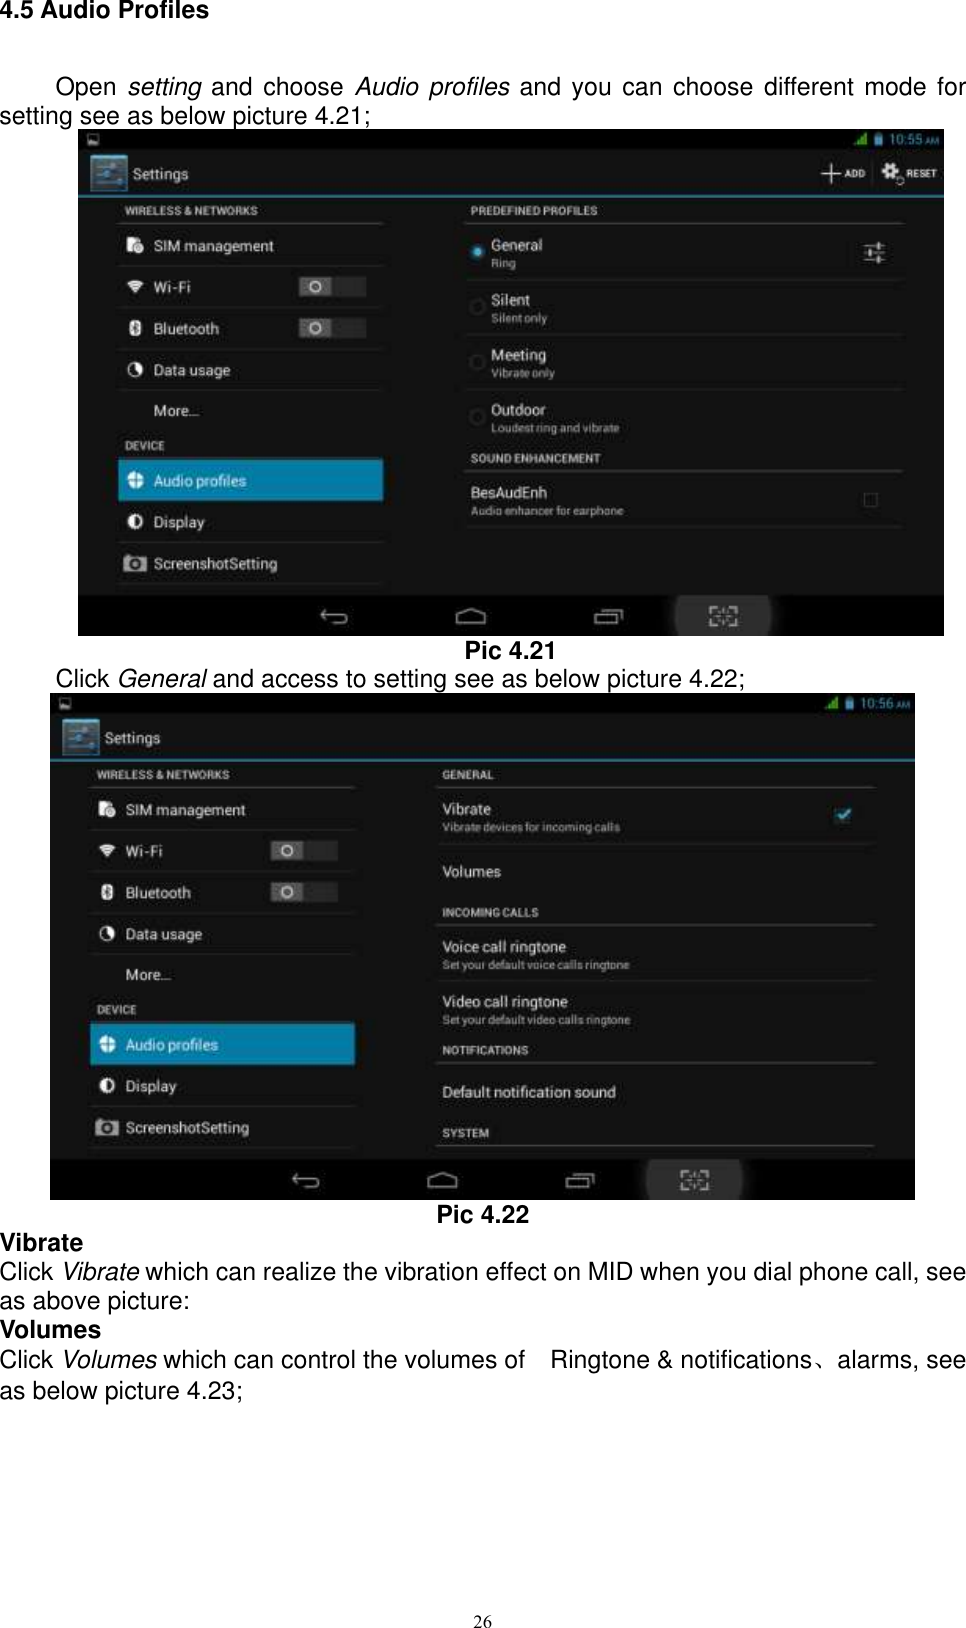      26 4.5 Audio Profiles   Open  setting and choose Audio  profiles and you can  choose different mode for setting see as below picture 4.21;  Pic 4.21 Click General and access to setting see as below picture 4.22;  Pic 4.22 Vibrate Click Vibrate which can realize the vibration effect on MID when you dial phone call, see as above picture: Volumes Click Volumes which can control the volumes of    Ringtone &amp; notifications、alarms, see as below picture 4.23; 